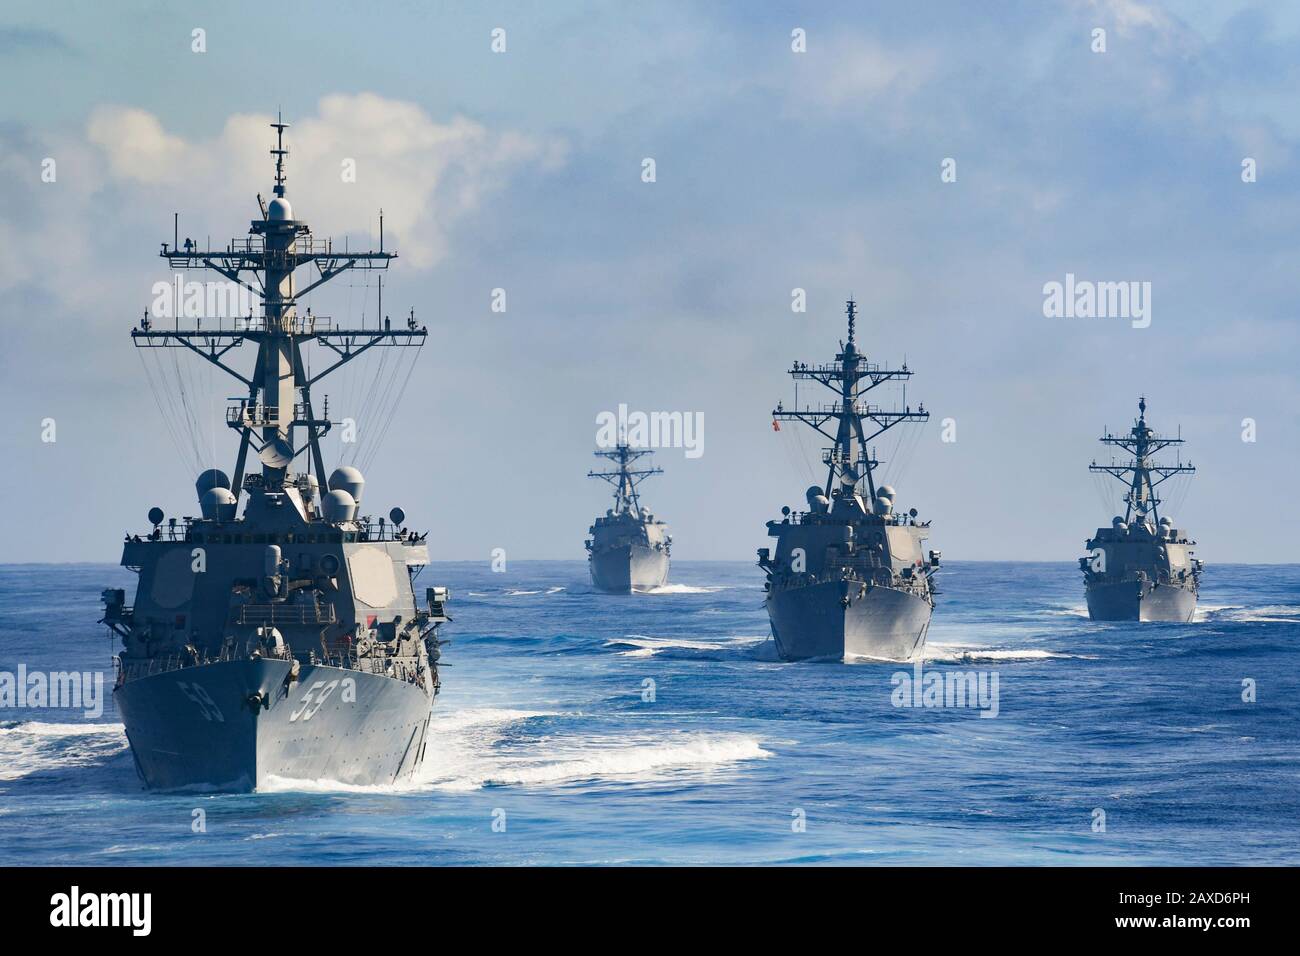 The U.S. Navy Theodore Roosevelt Carrier Strike Group Destroyer Squadron 23, led by the Arleigh Burke-Class guided-missile destroyer USS Russell transits the Pacific Ocean in formation January 24, 2020 in the Pacific Ocean. Stock Photo